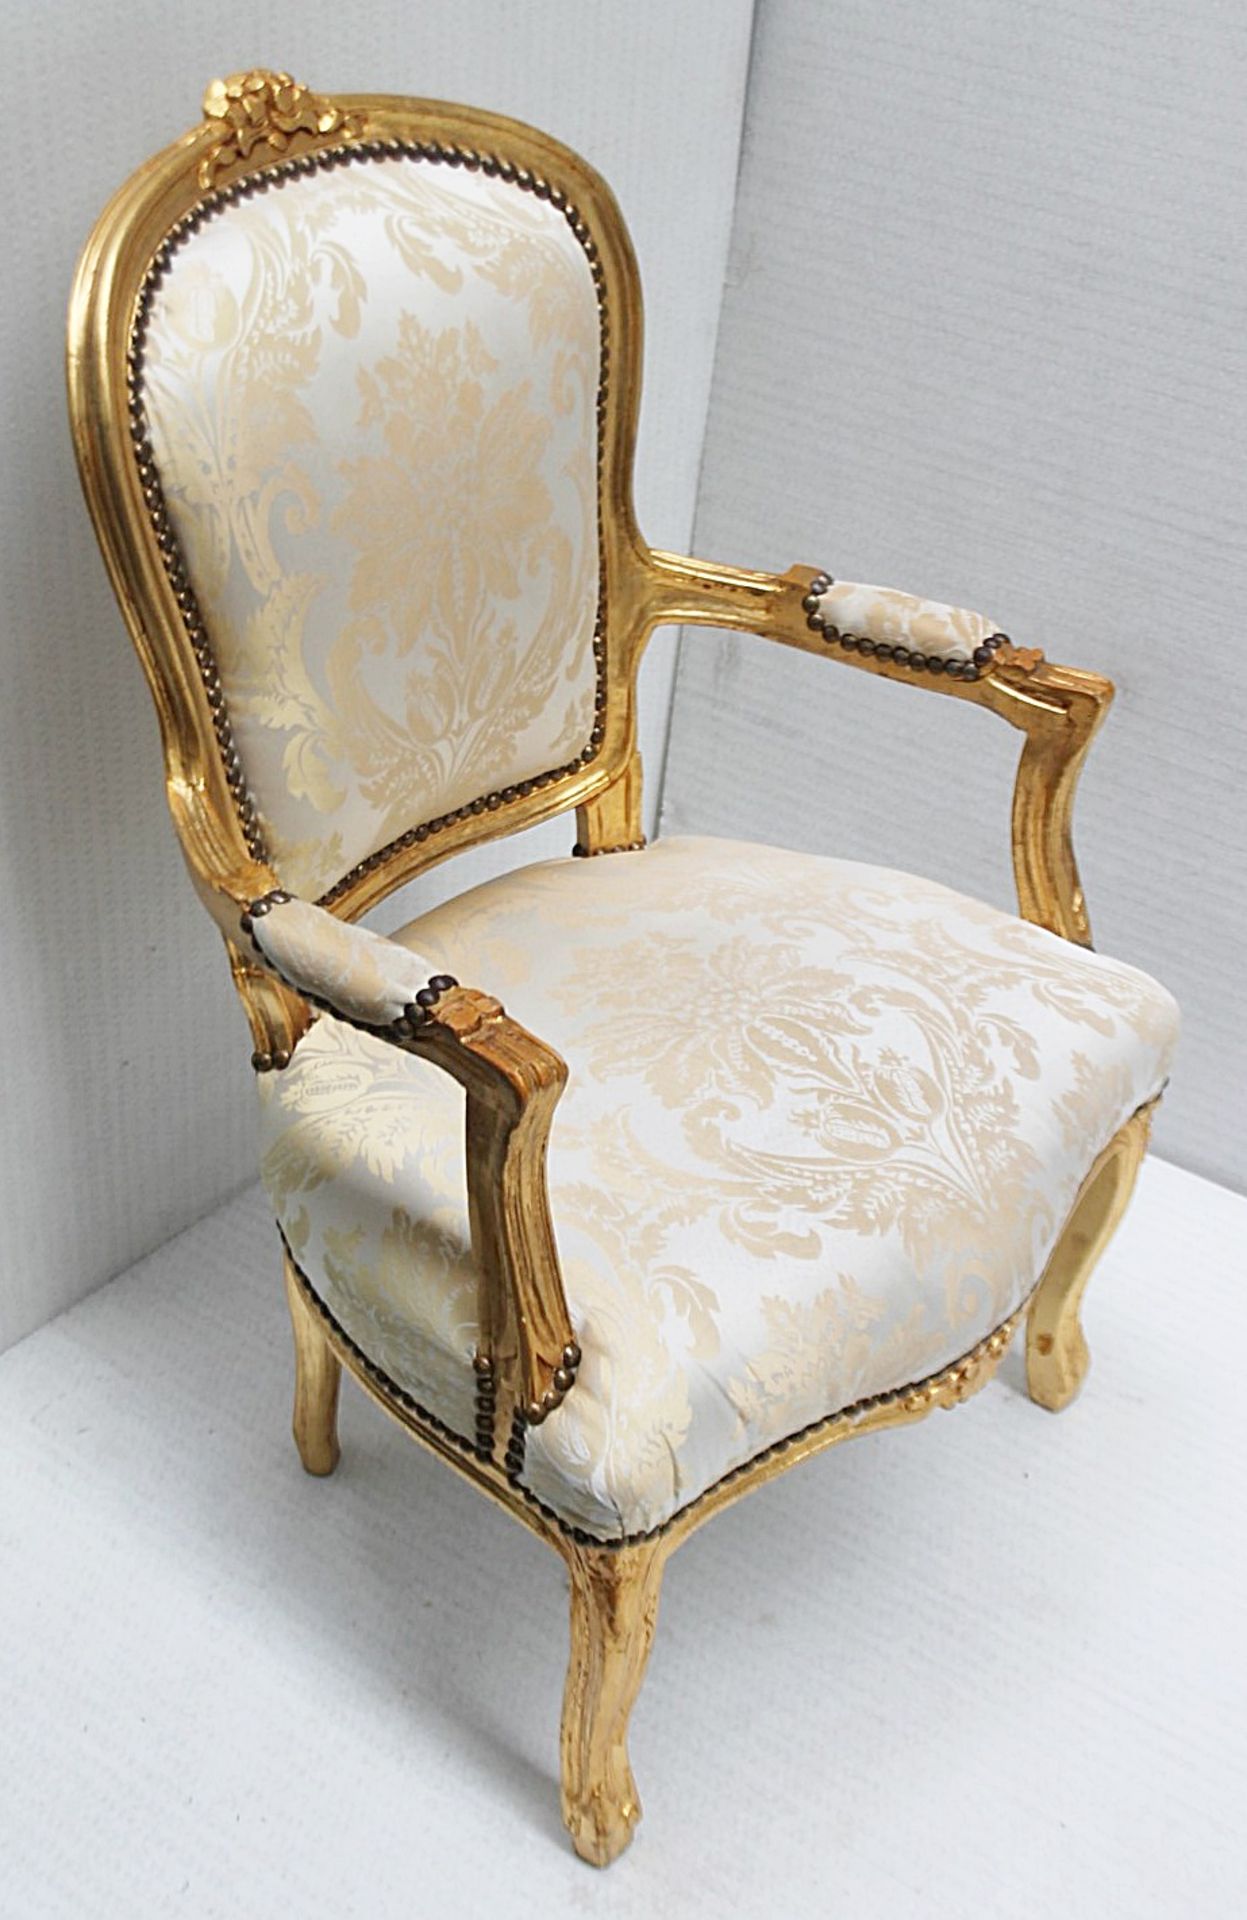 1 x Regency-Style Upholstered Chair In Gold & Silver With Ornate Carved Detailing - Recently Removed - Image 3 of 11